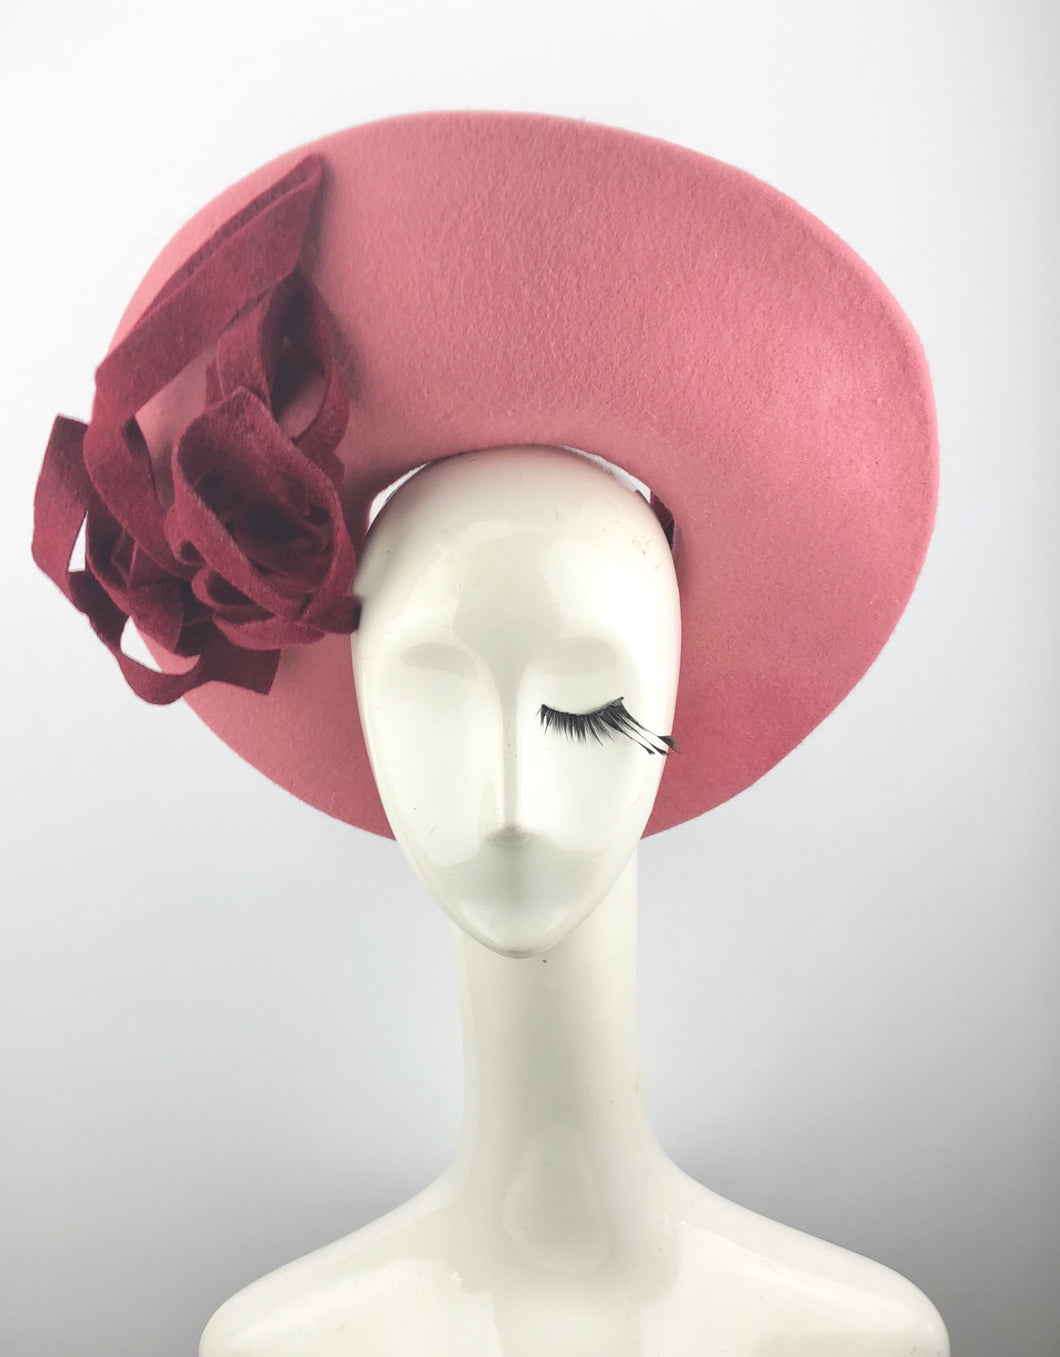 Pink Felt Halo with Maroon Sculptured Accents